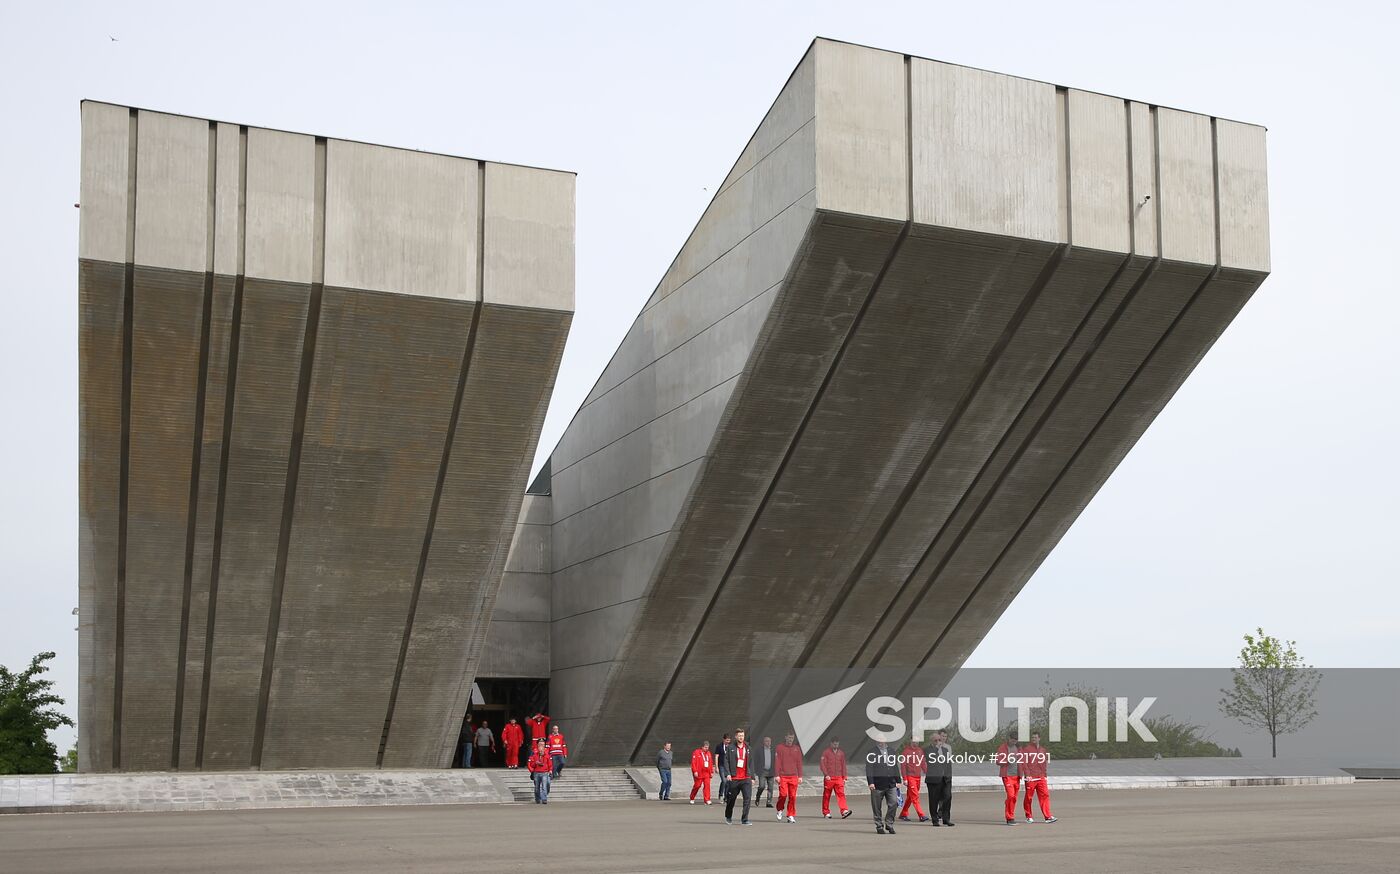 Members and coaches of Russian national ice hockey team lay flowers at National Memorial in Czech Republic